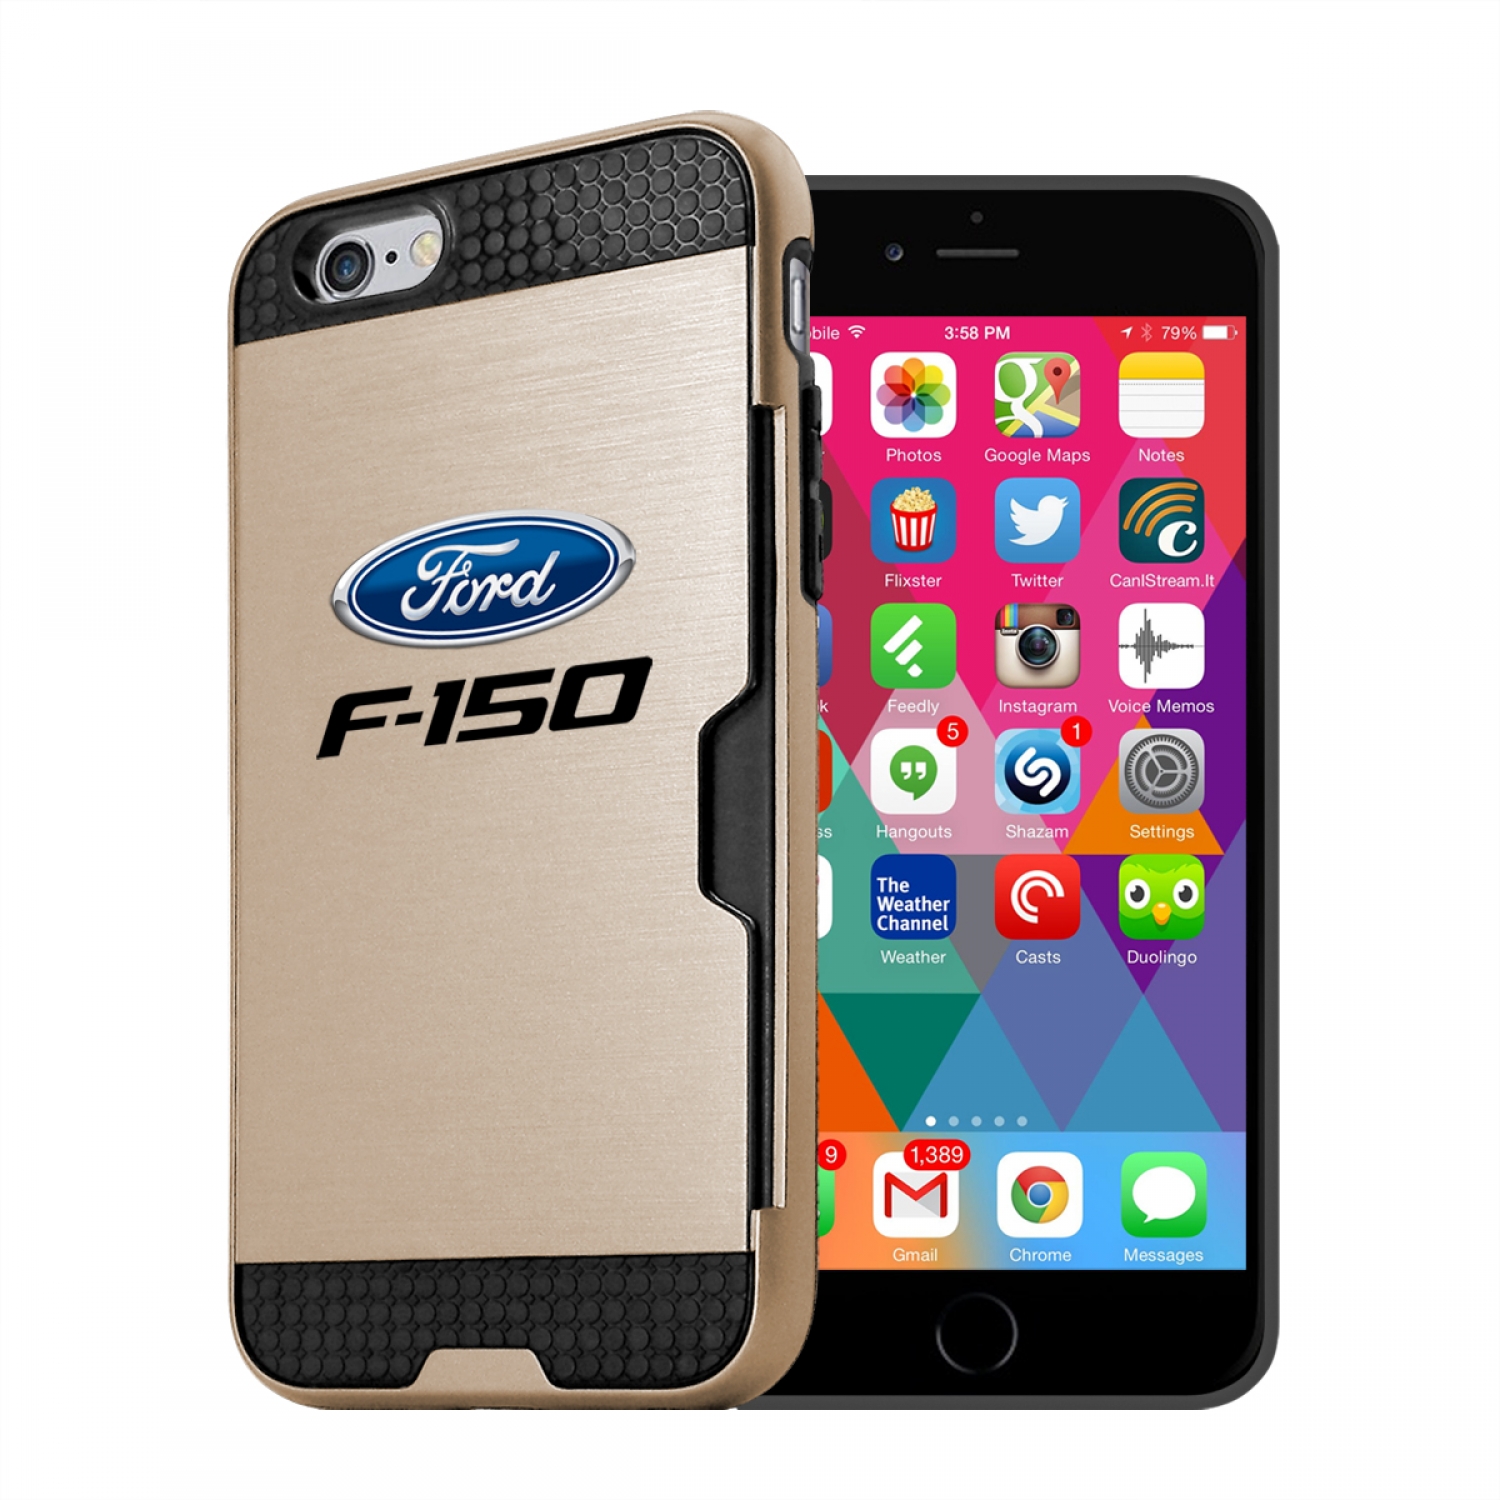 Ford F-150 iPhone 6 6s Ultra Thin TPU Golden Phone Case with Credit Card Slot Wallet